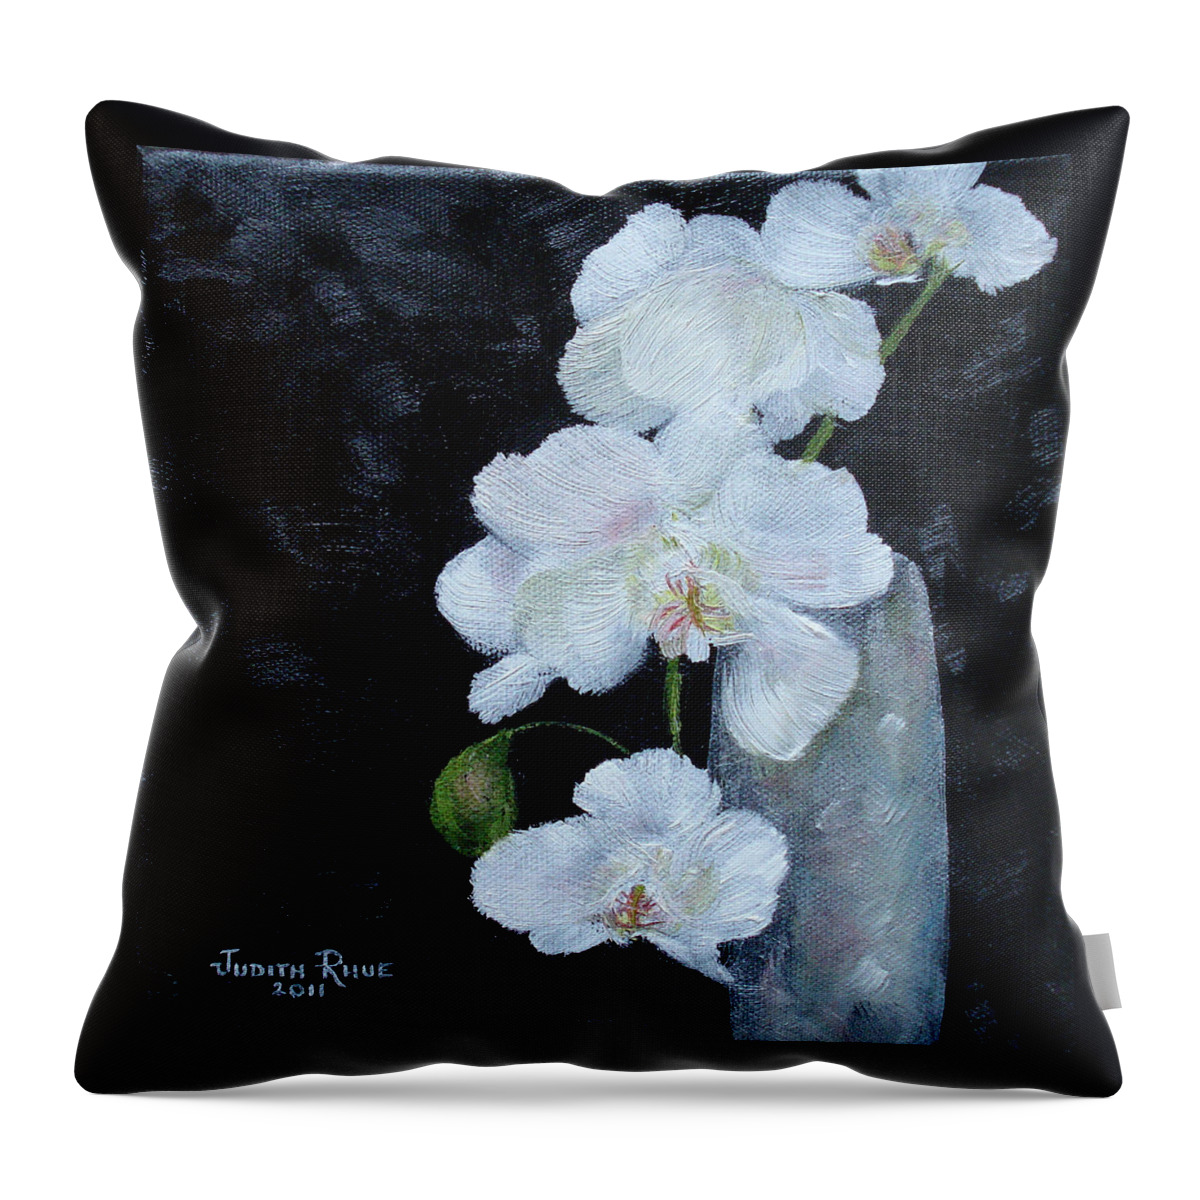 Still Life Throw Pillow featuring the painting White Orchid by Judith Rhue